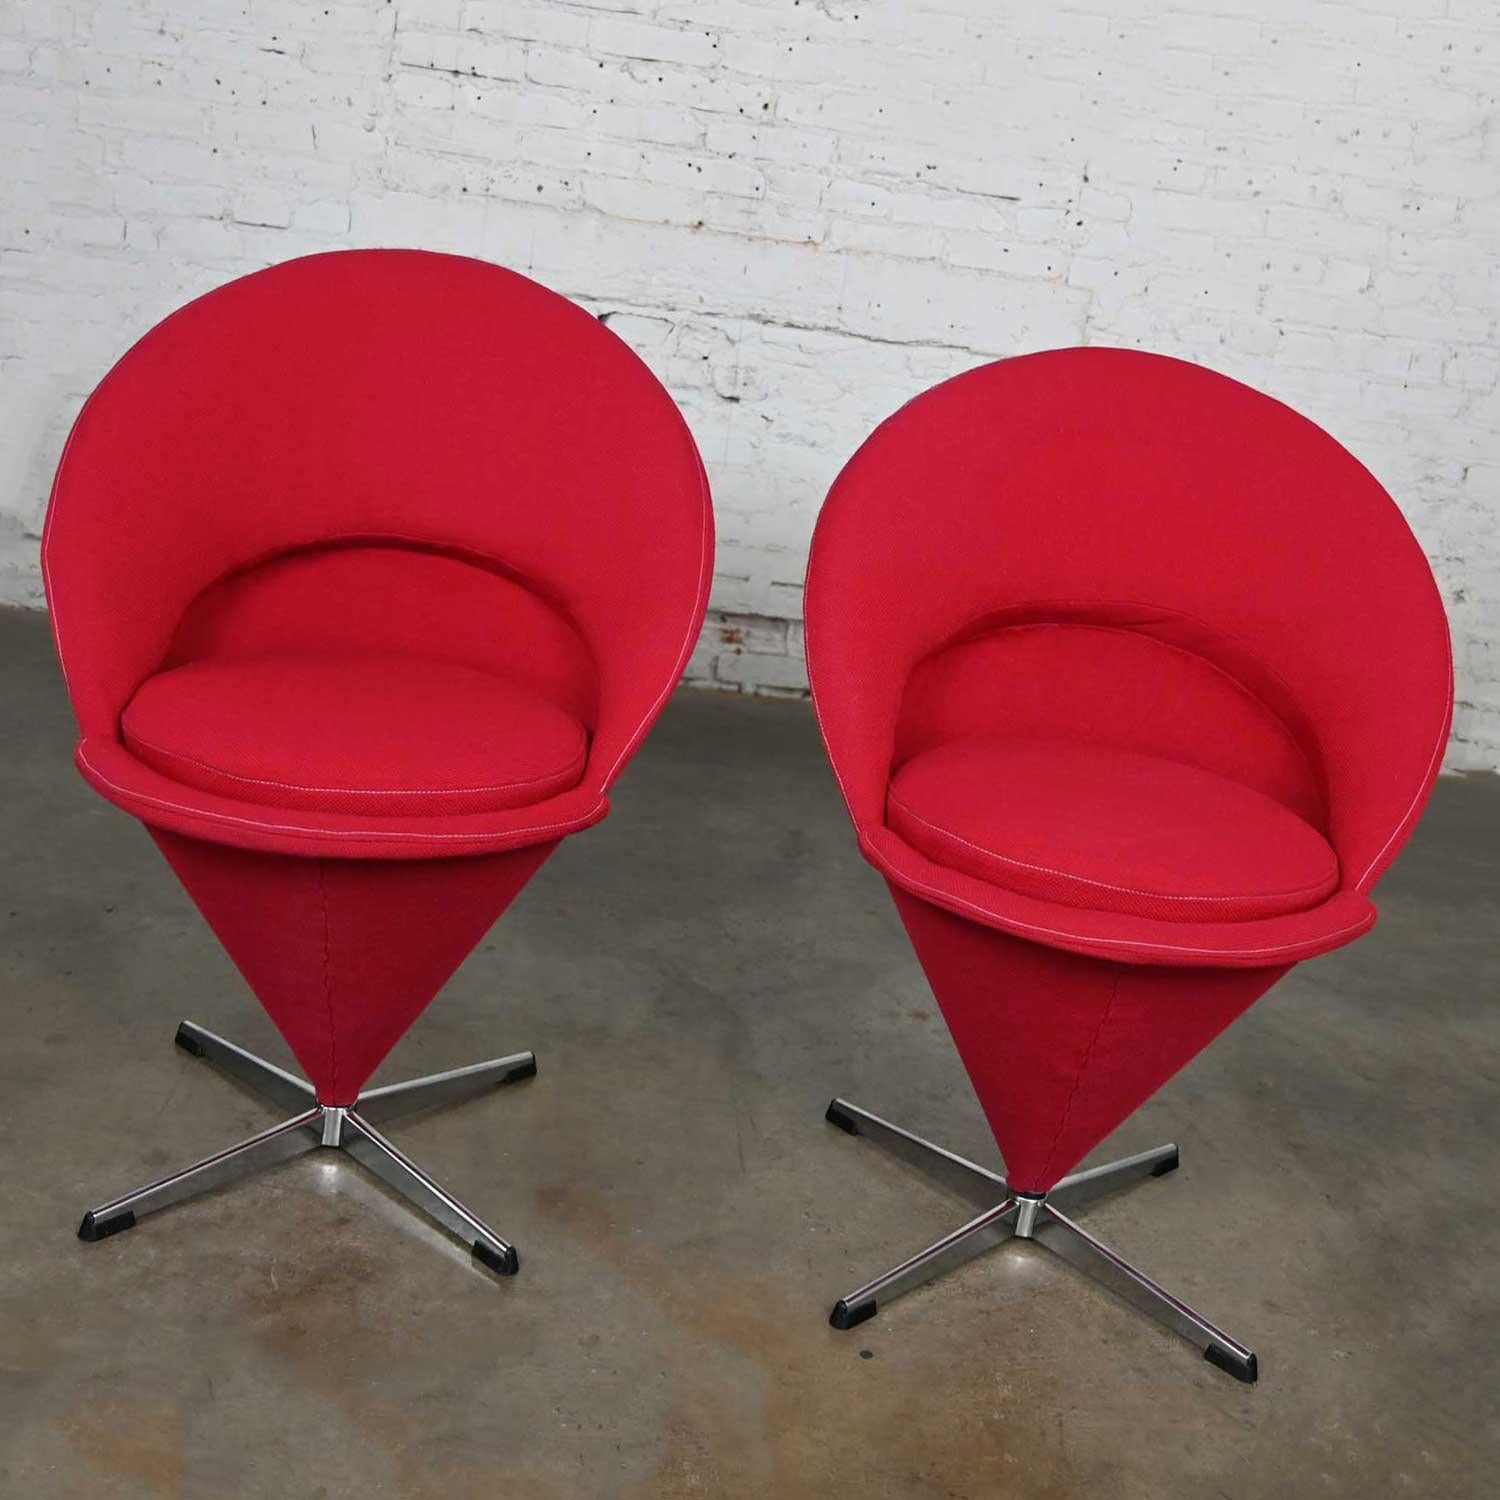 Magnificent vintage mid-century modern pair of red Cone chairs by Verner Panton for Fritz Hansen comprised of red hopsacking covered bent sheet metal frames, loose round seat cushions, and 4 prong swivel chrome bases with black glides. This piece